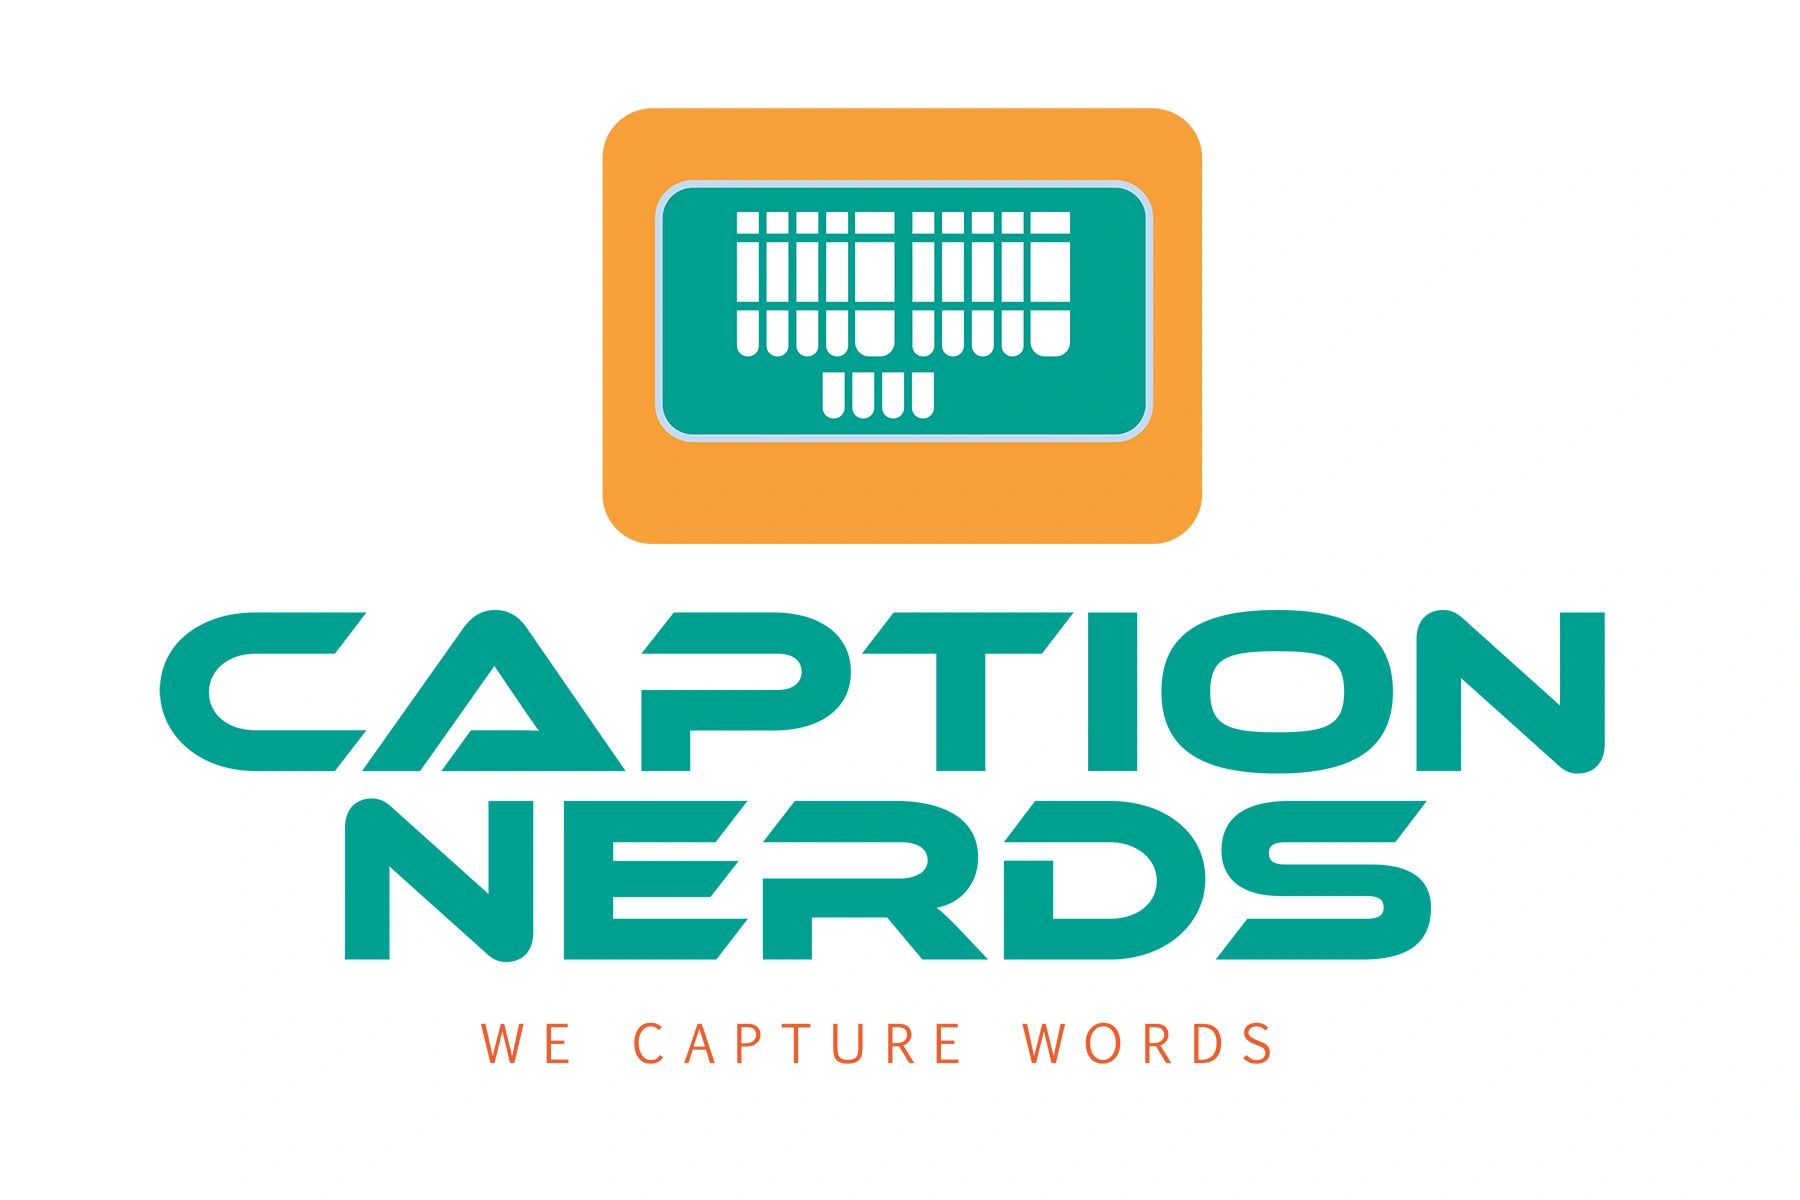 Image Description: Sci-fi inspired logo with a steno machine, text: Caption Nerds we capture words.